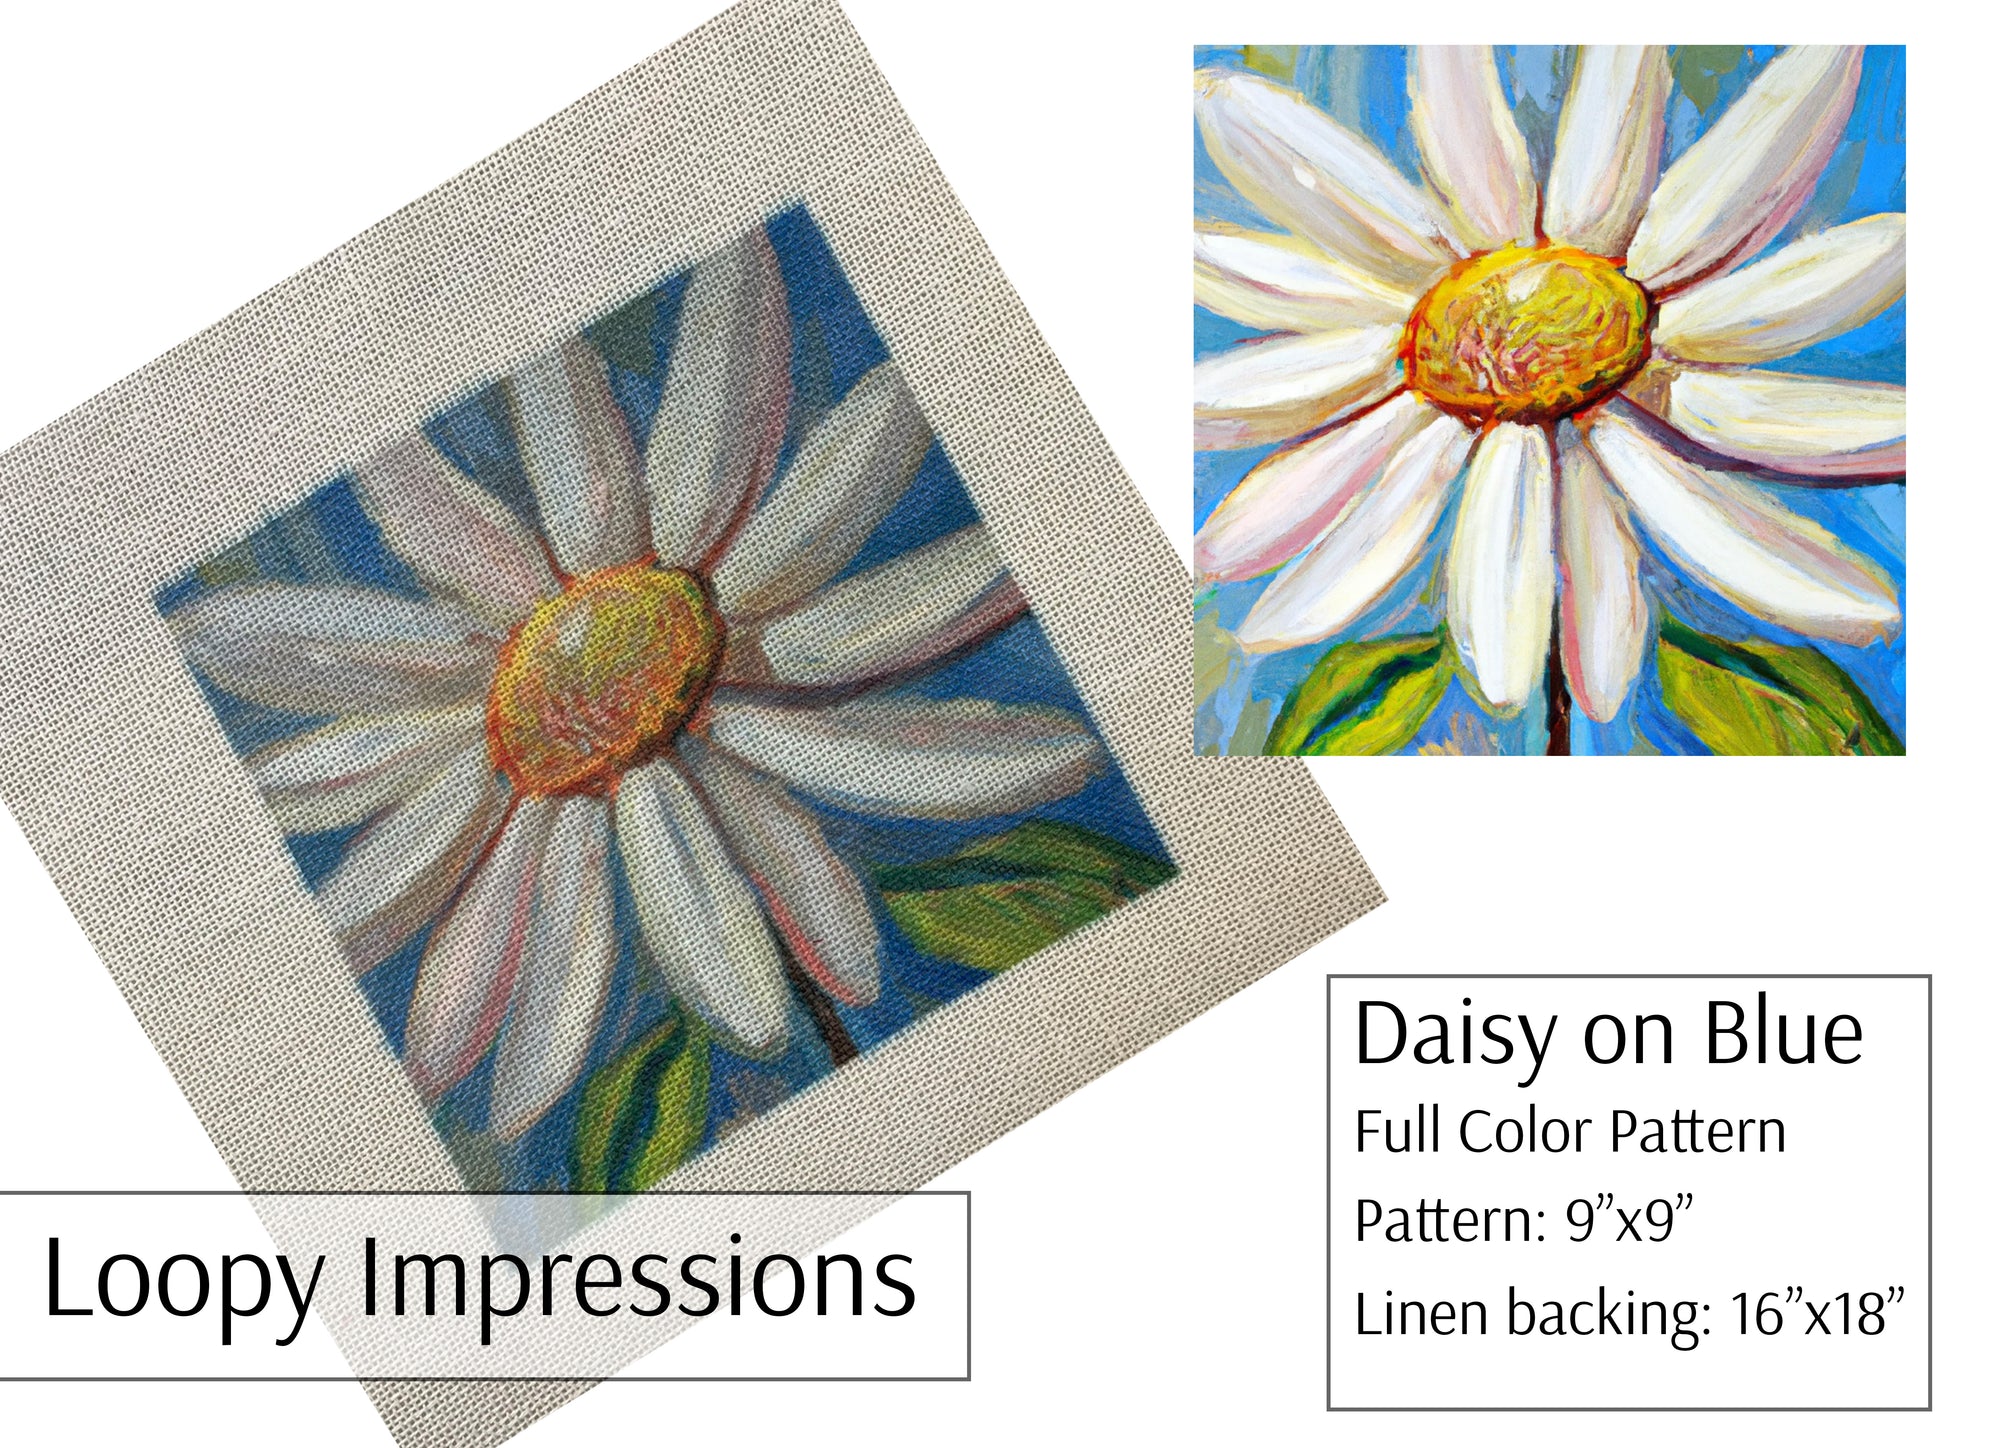 Loopy Impressions Full Color Pattern - Daisy on Blue